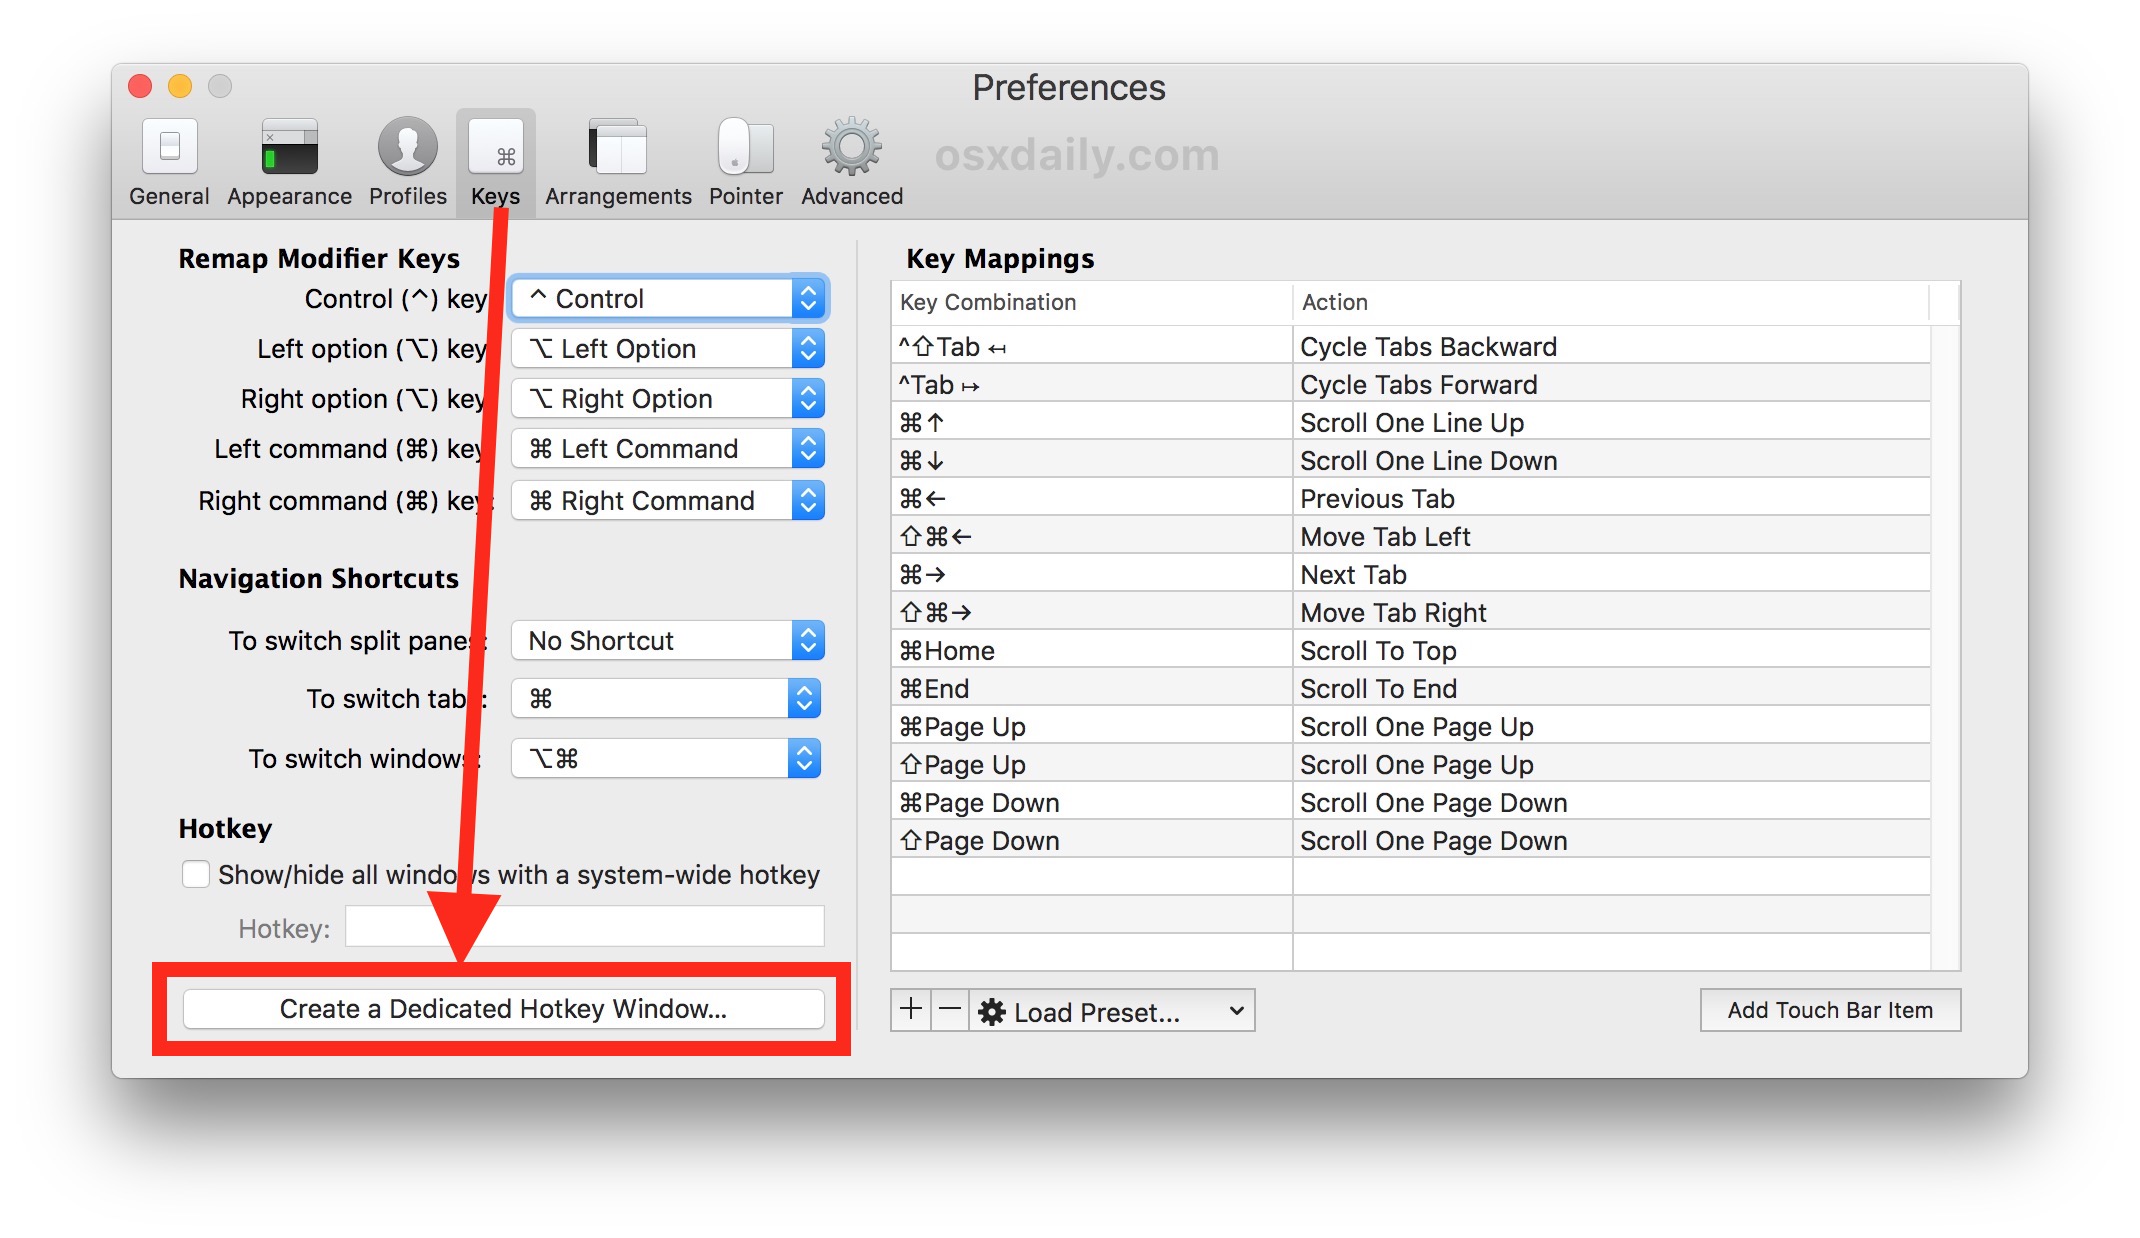 control click down excel for mac